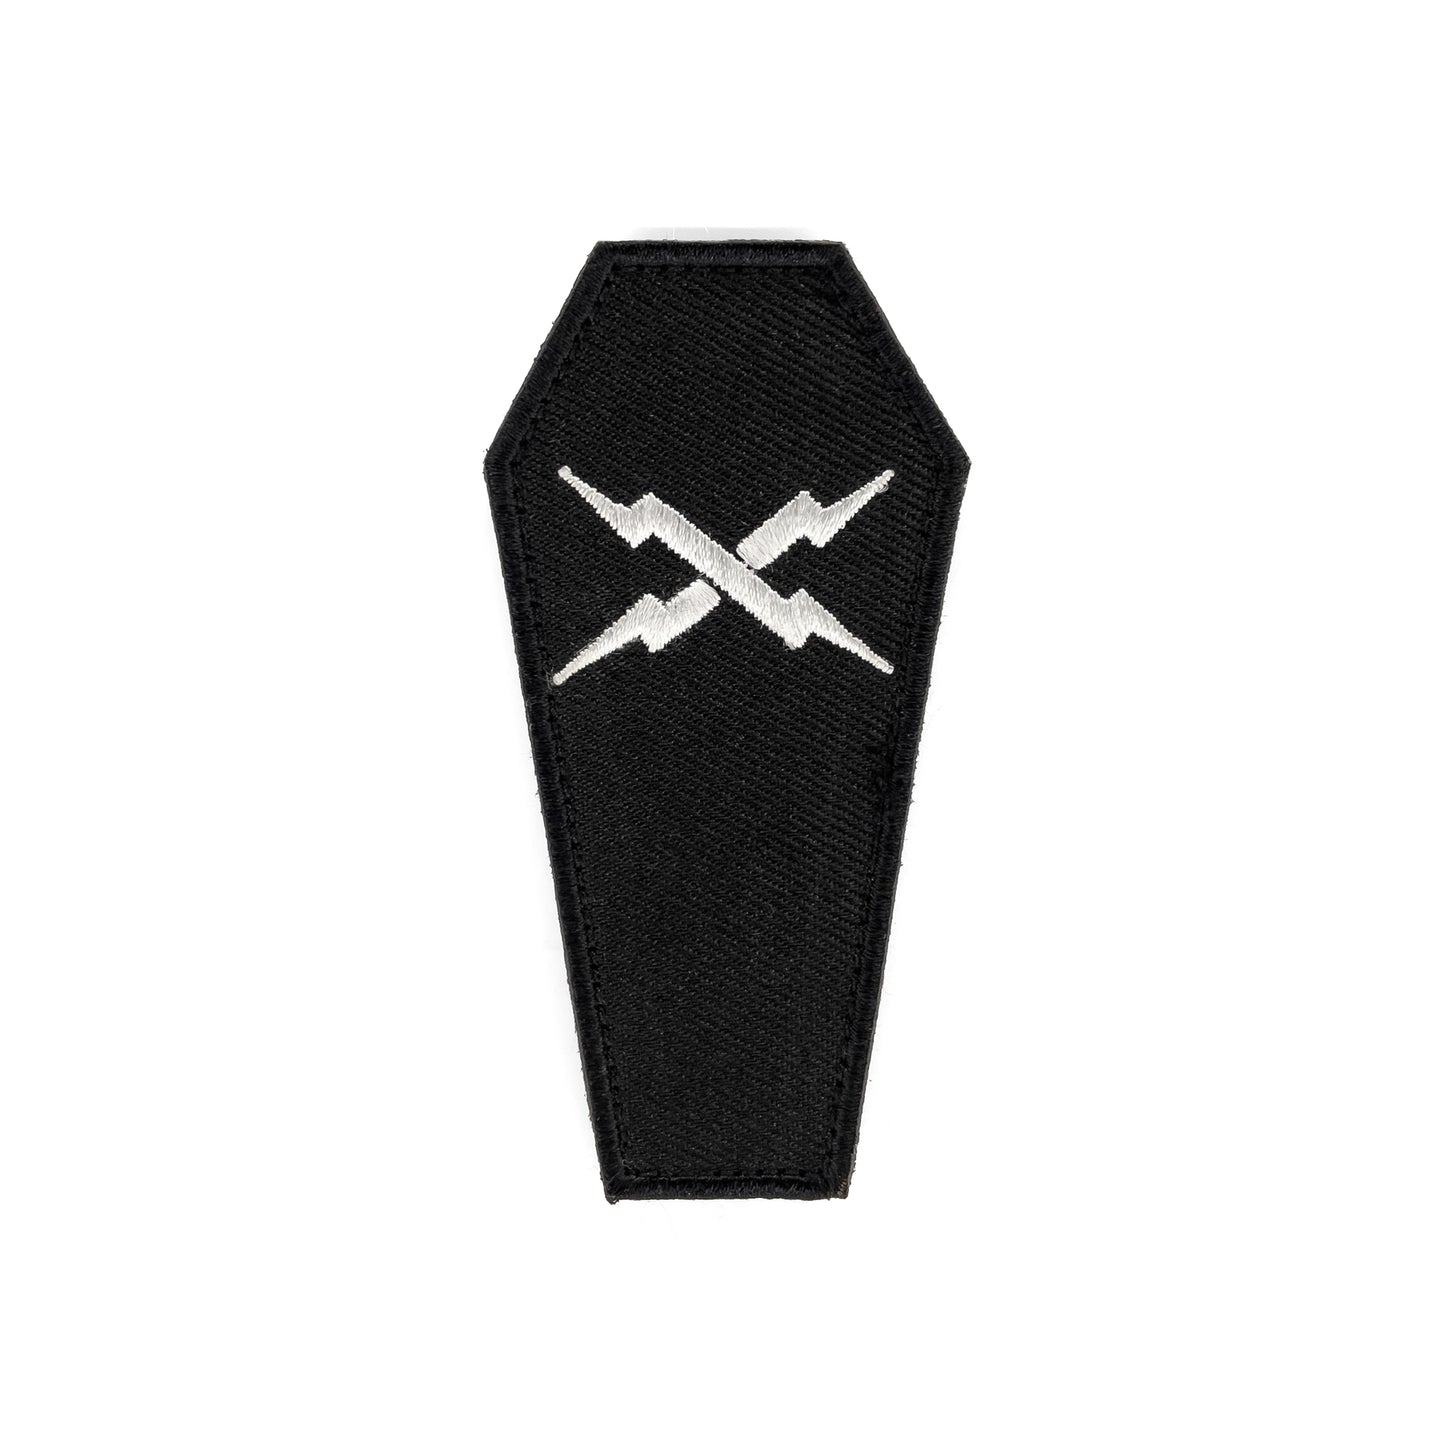 COFFIN EMBROIDERED PATCH